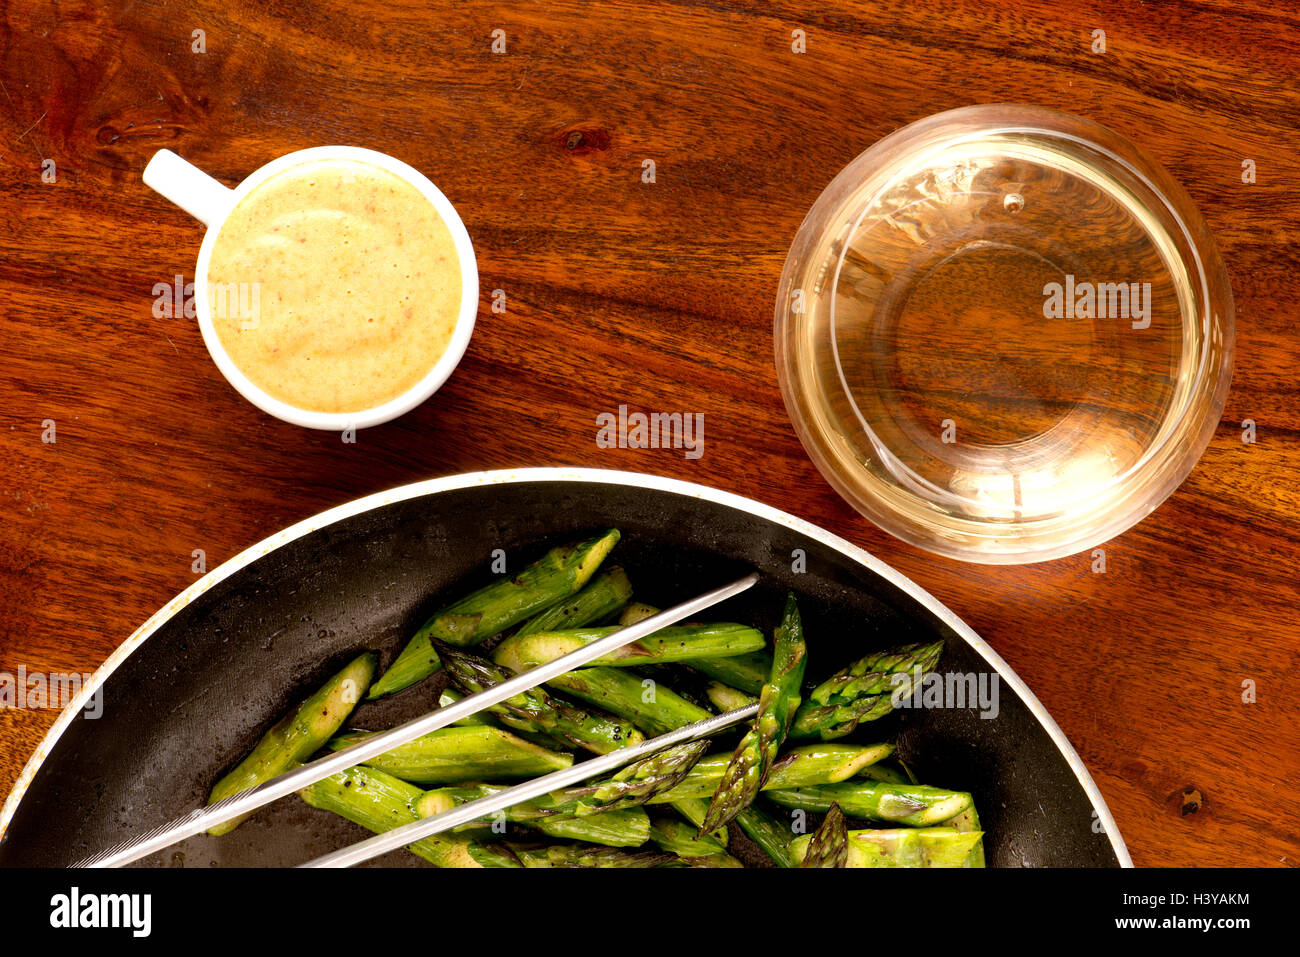 Fried green asparagus in pan. Served with sauce and white wine. Stock Photo